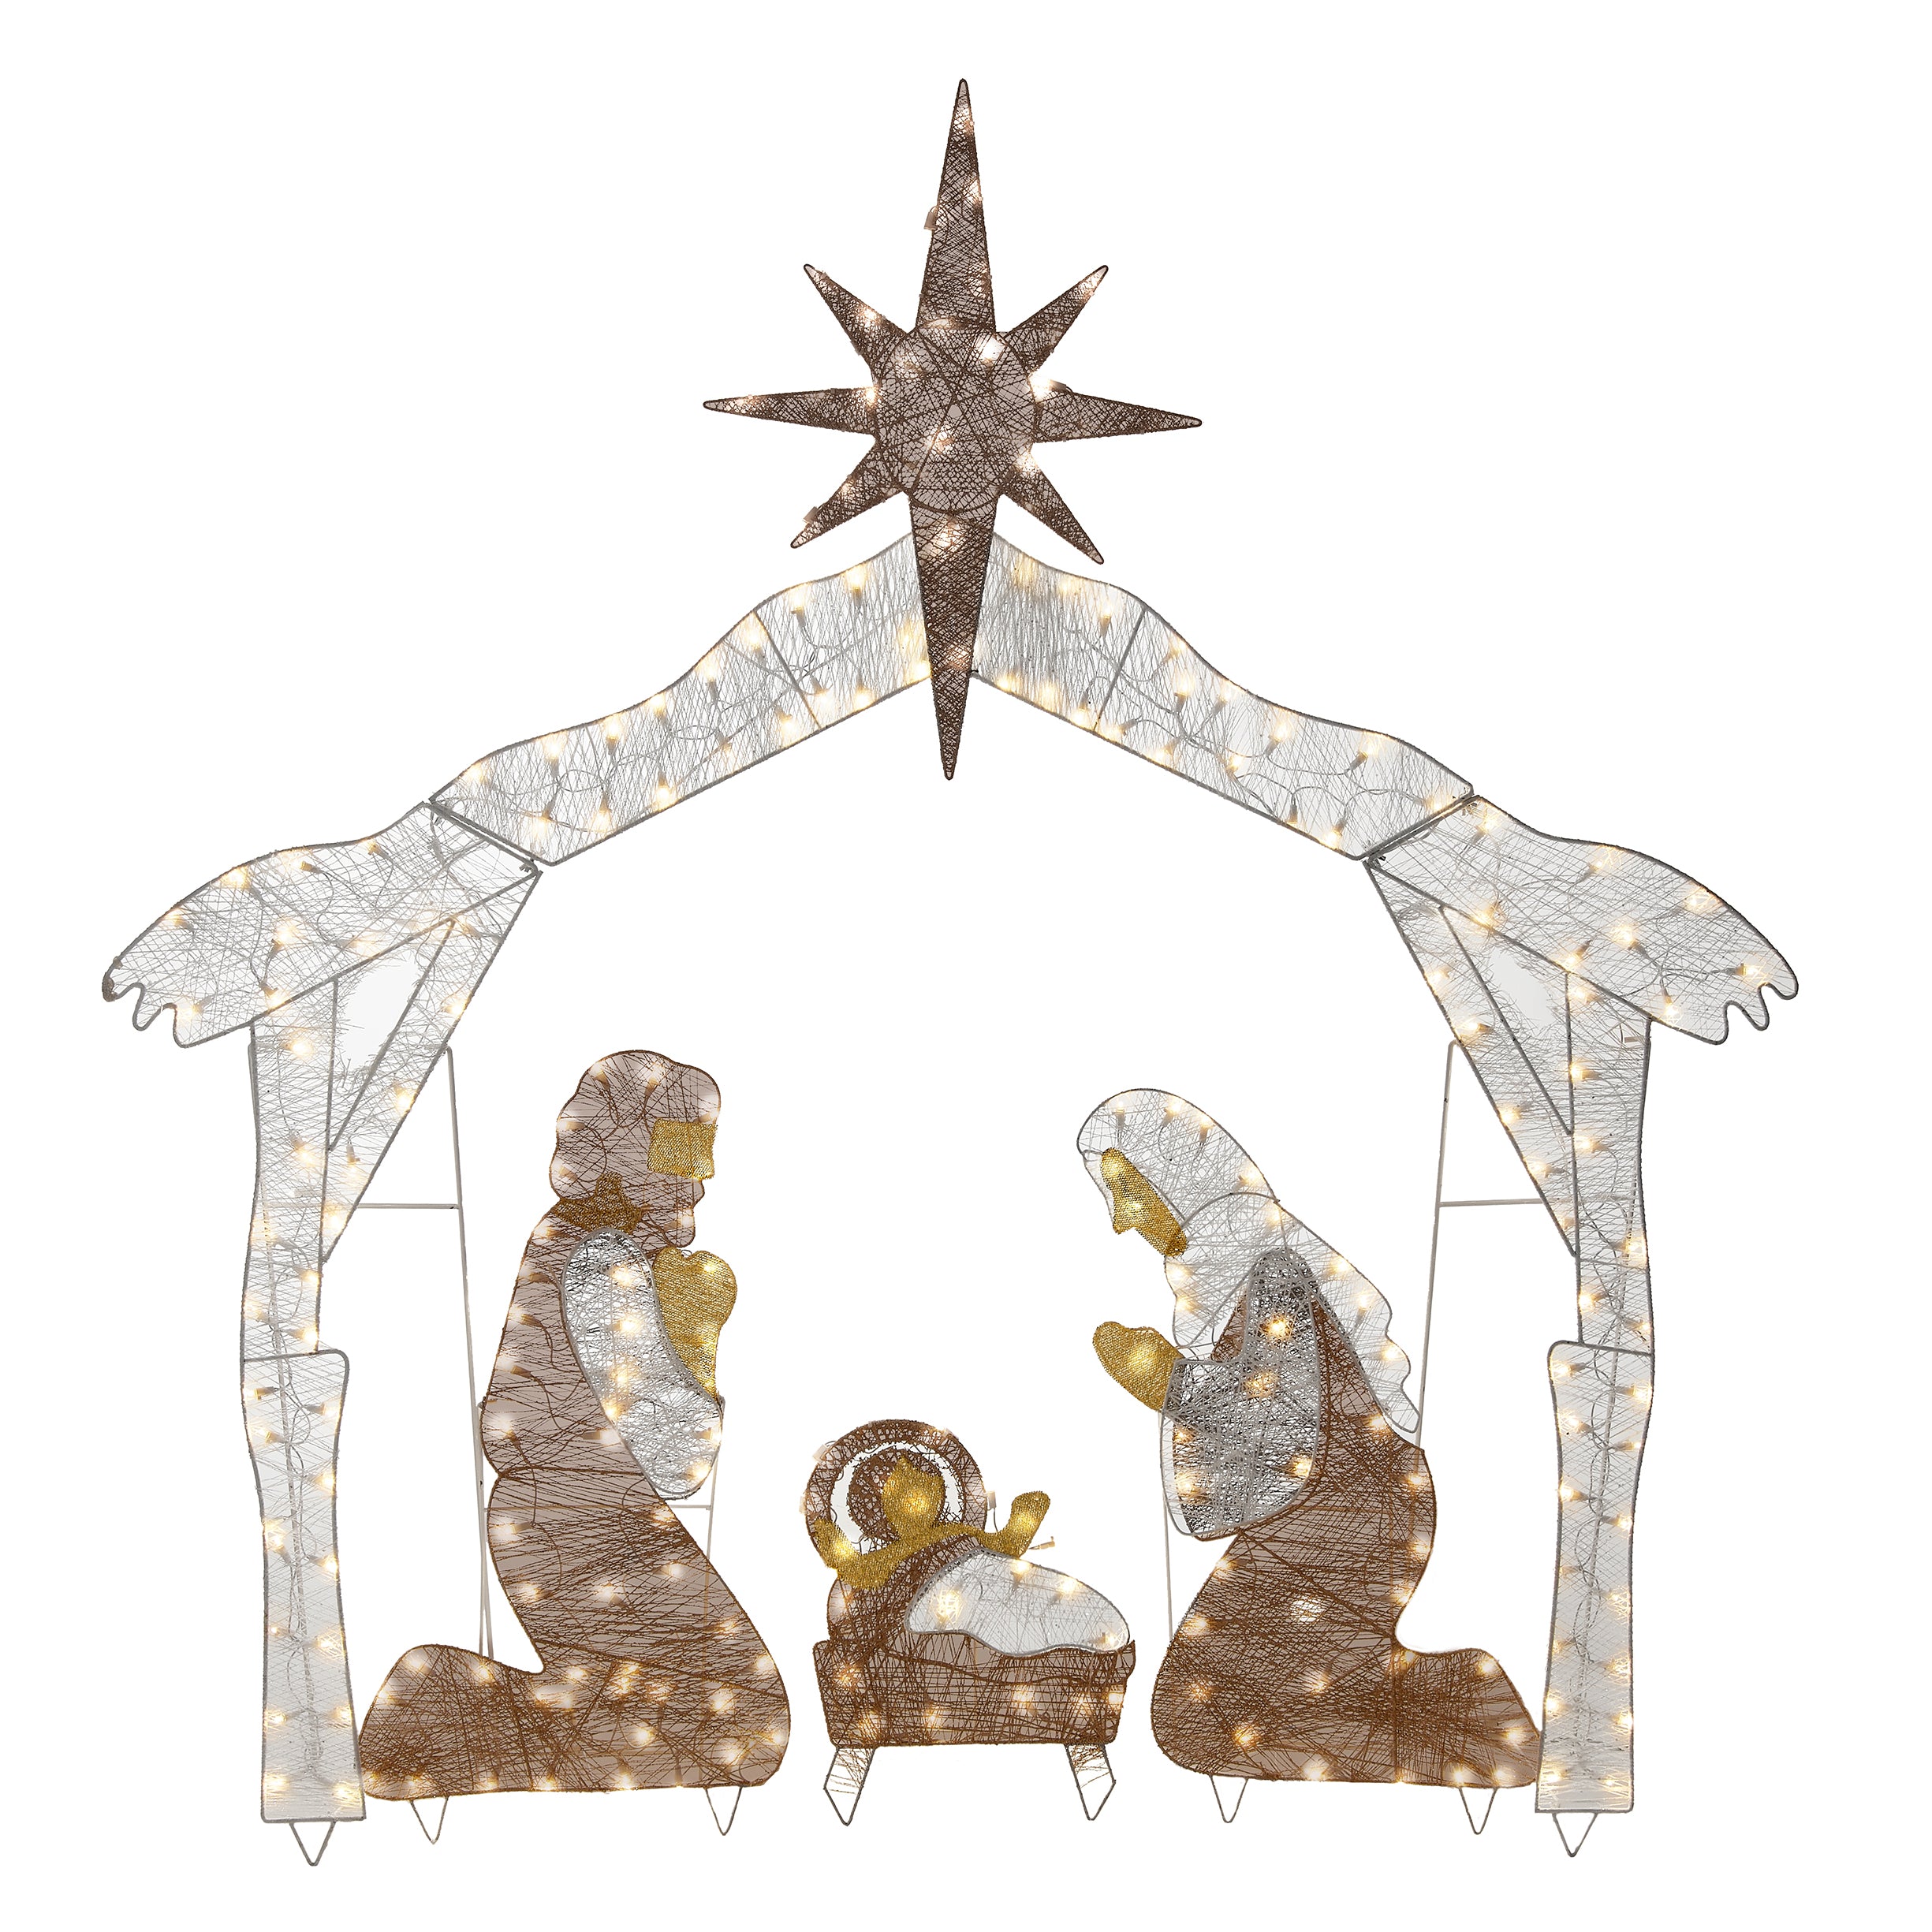 72in. Nativity Scene With White Led Lights – National Tree Company